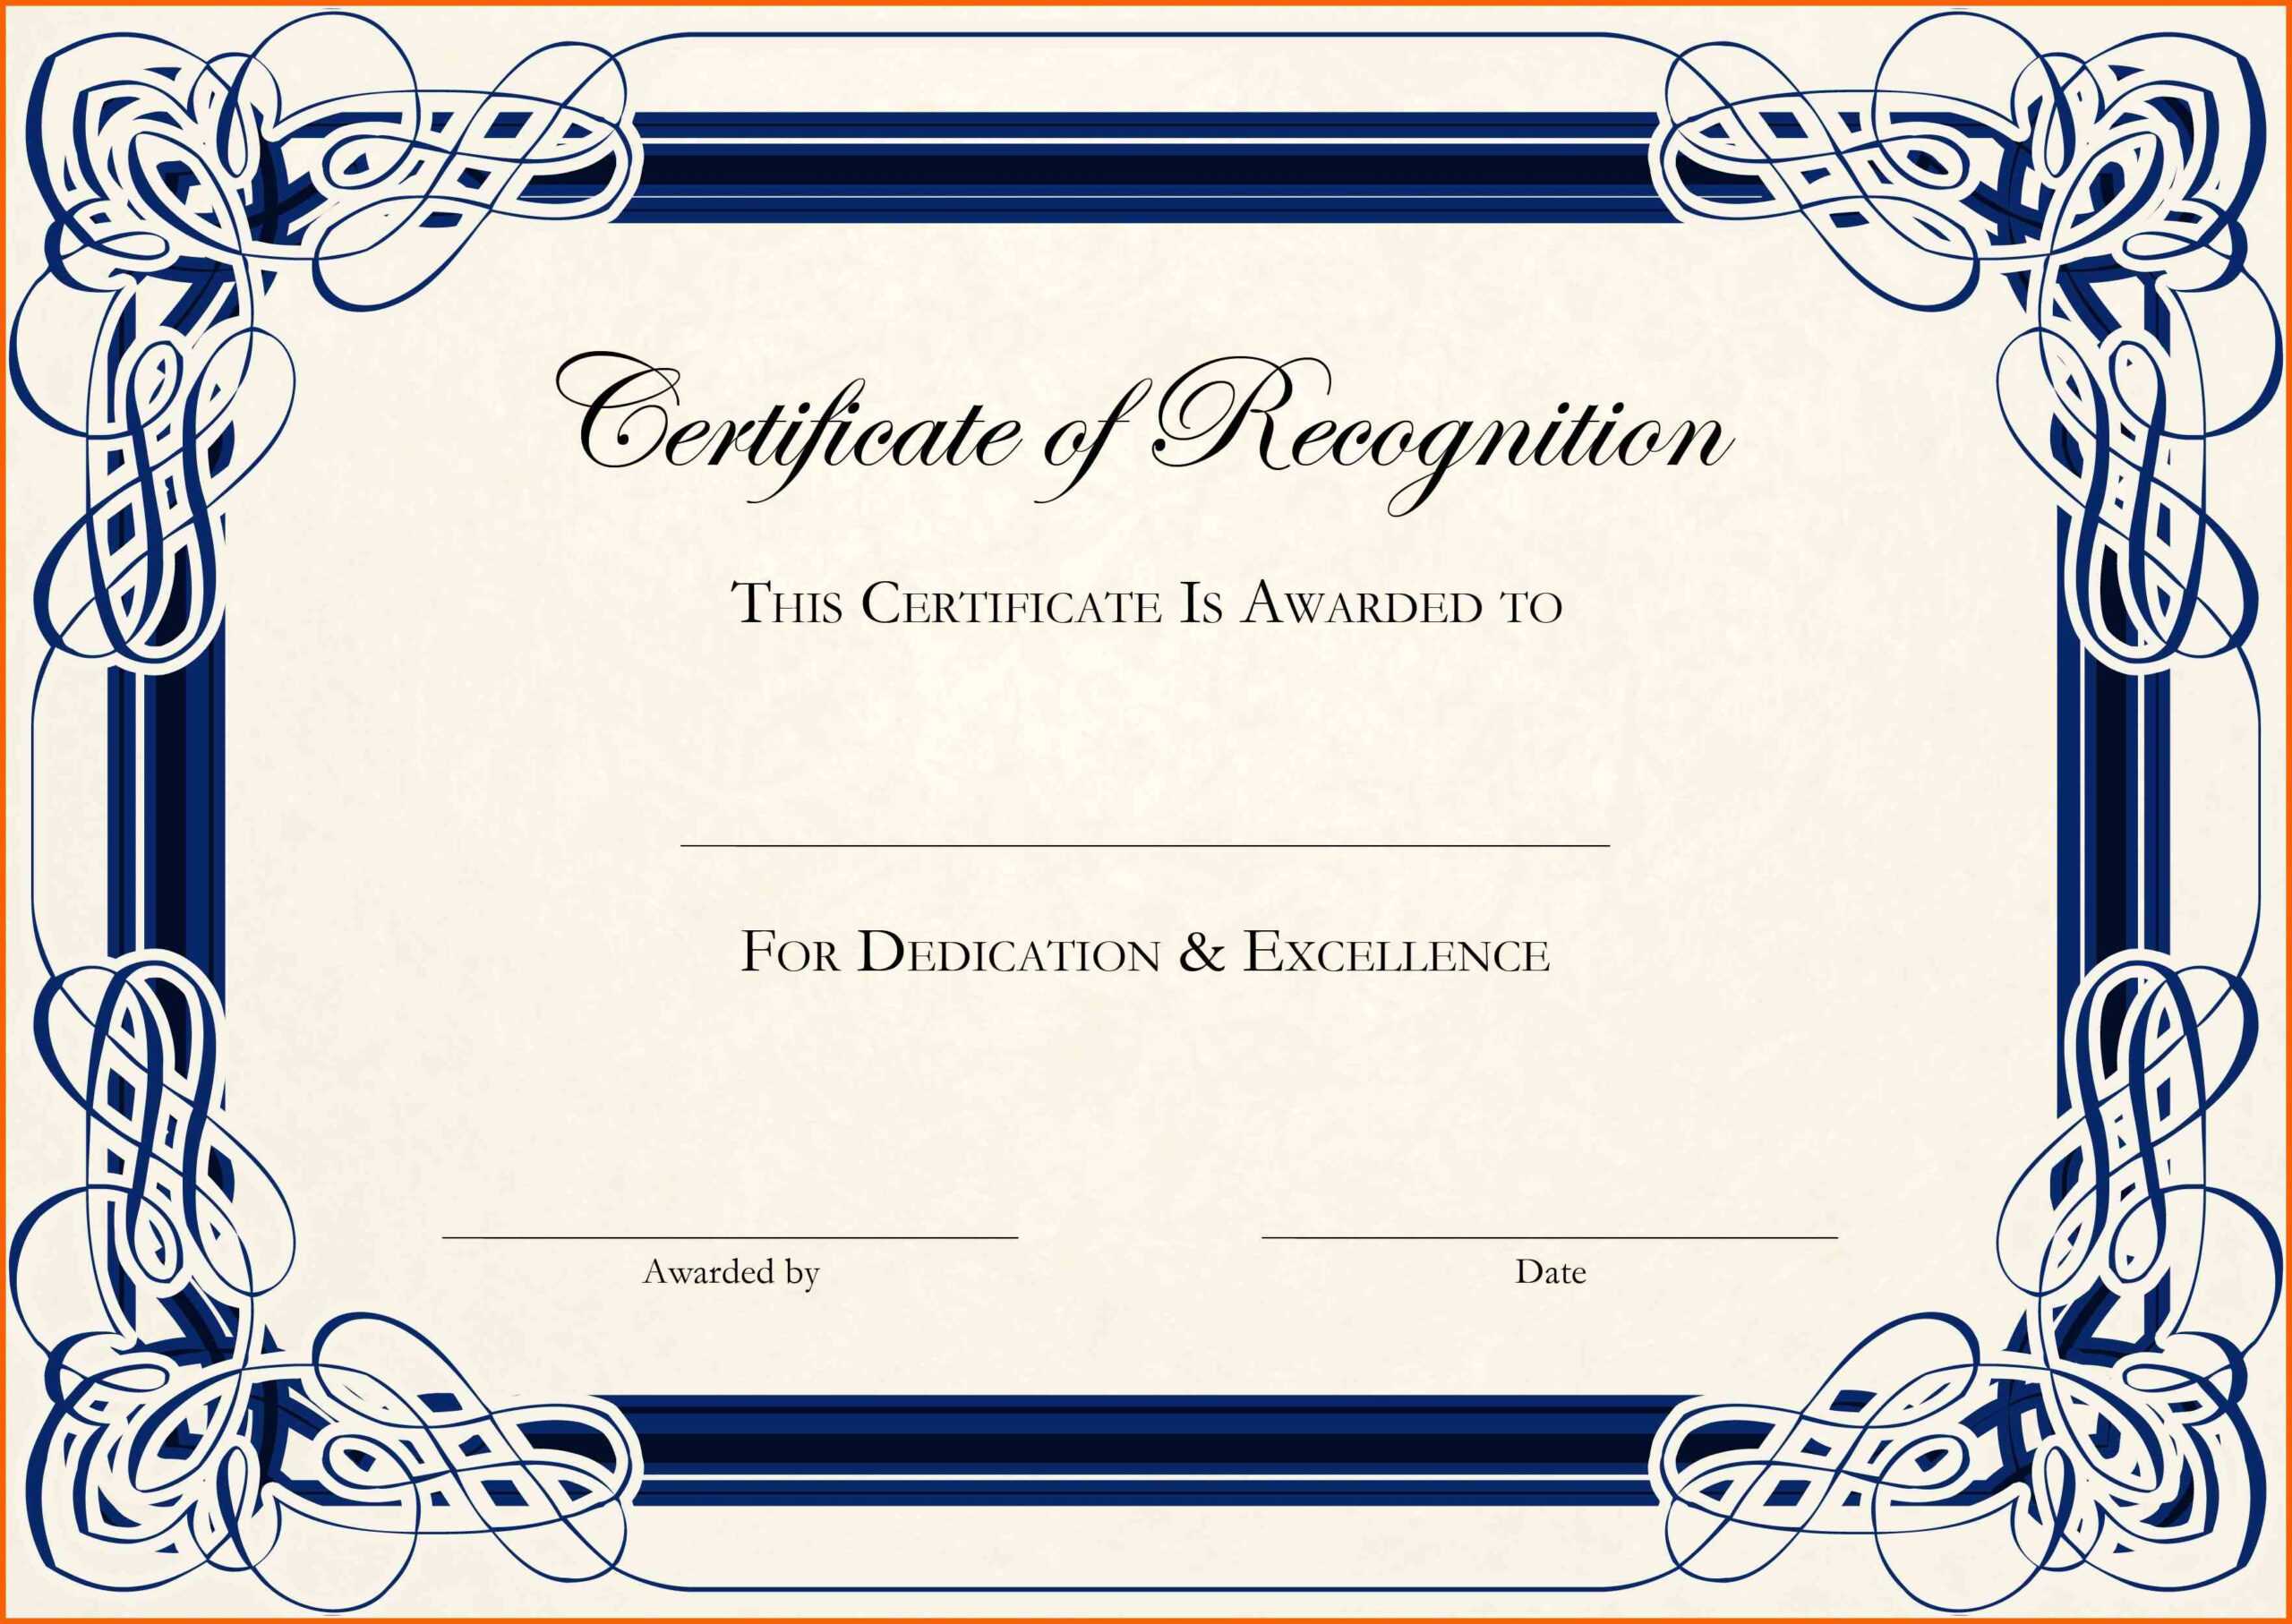 11+ Free Downloads Certificate Templates In Word | Ml Datos Pertaining To Certificate Templates For Word Free Downloads